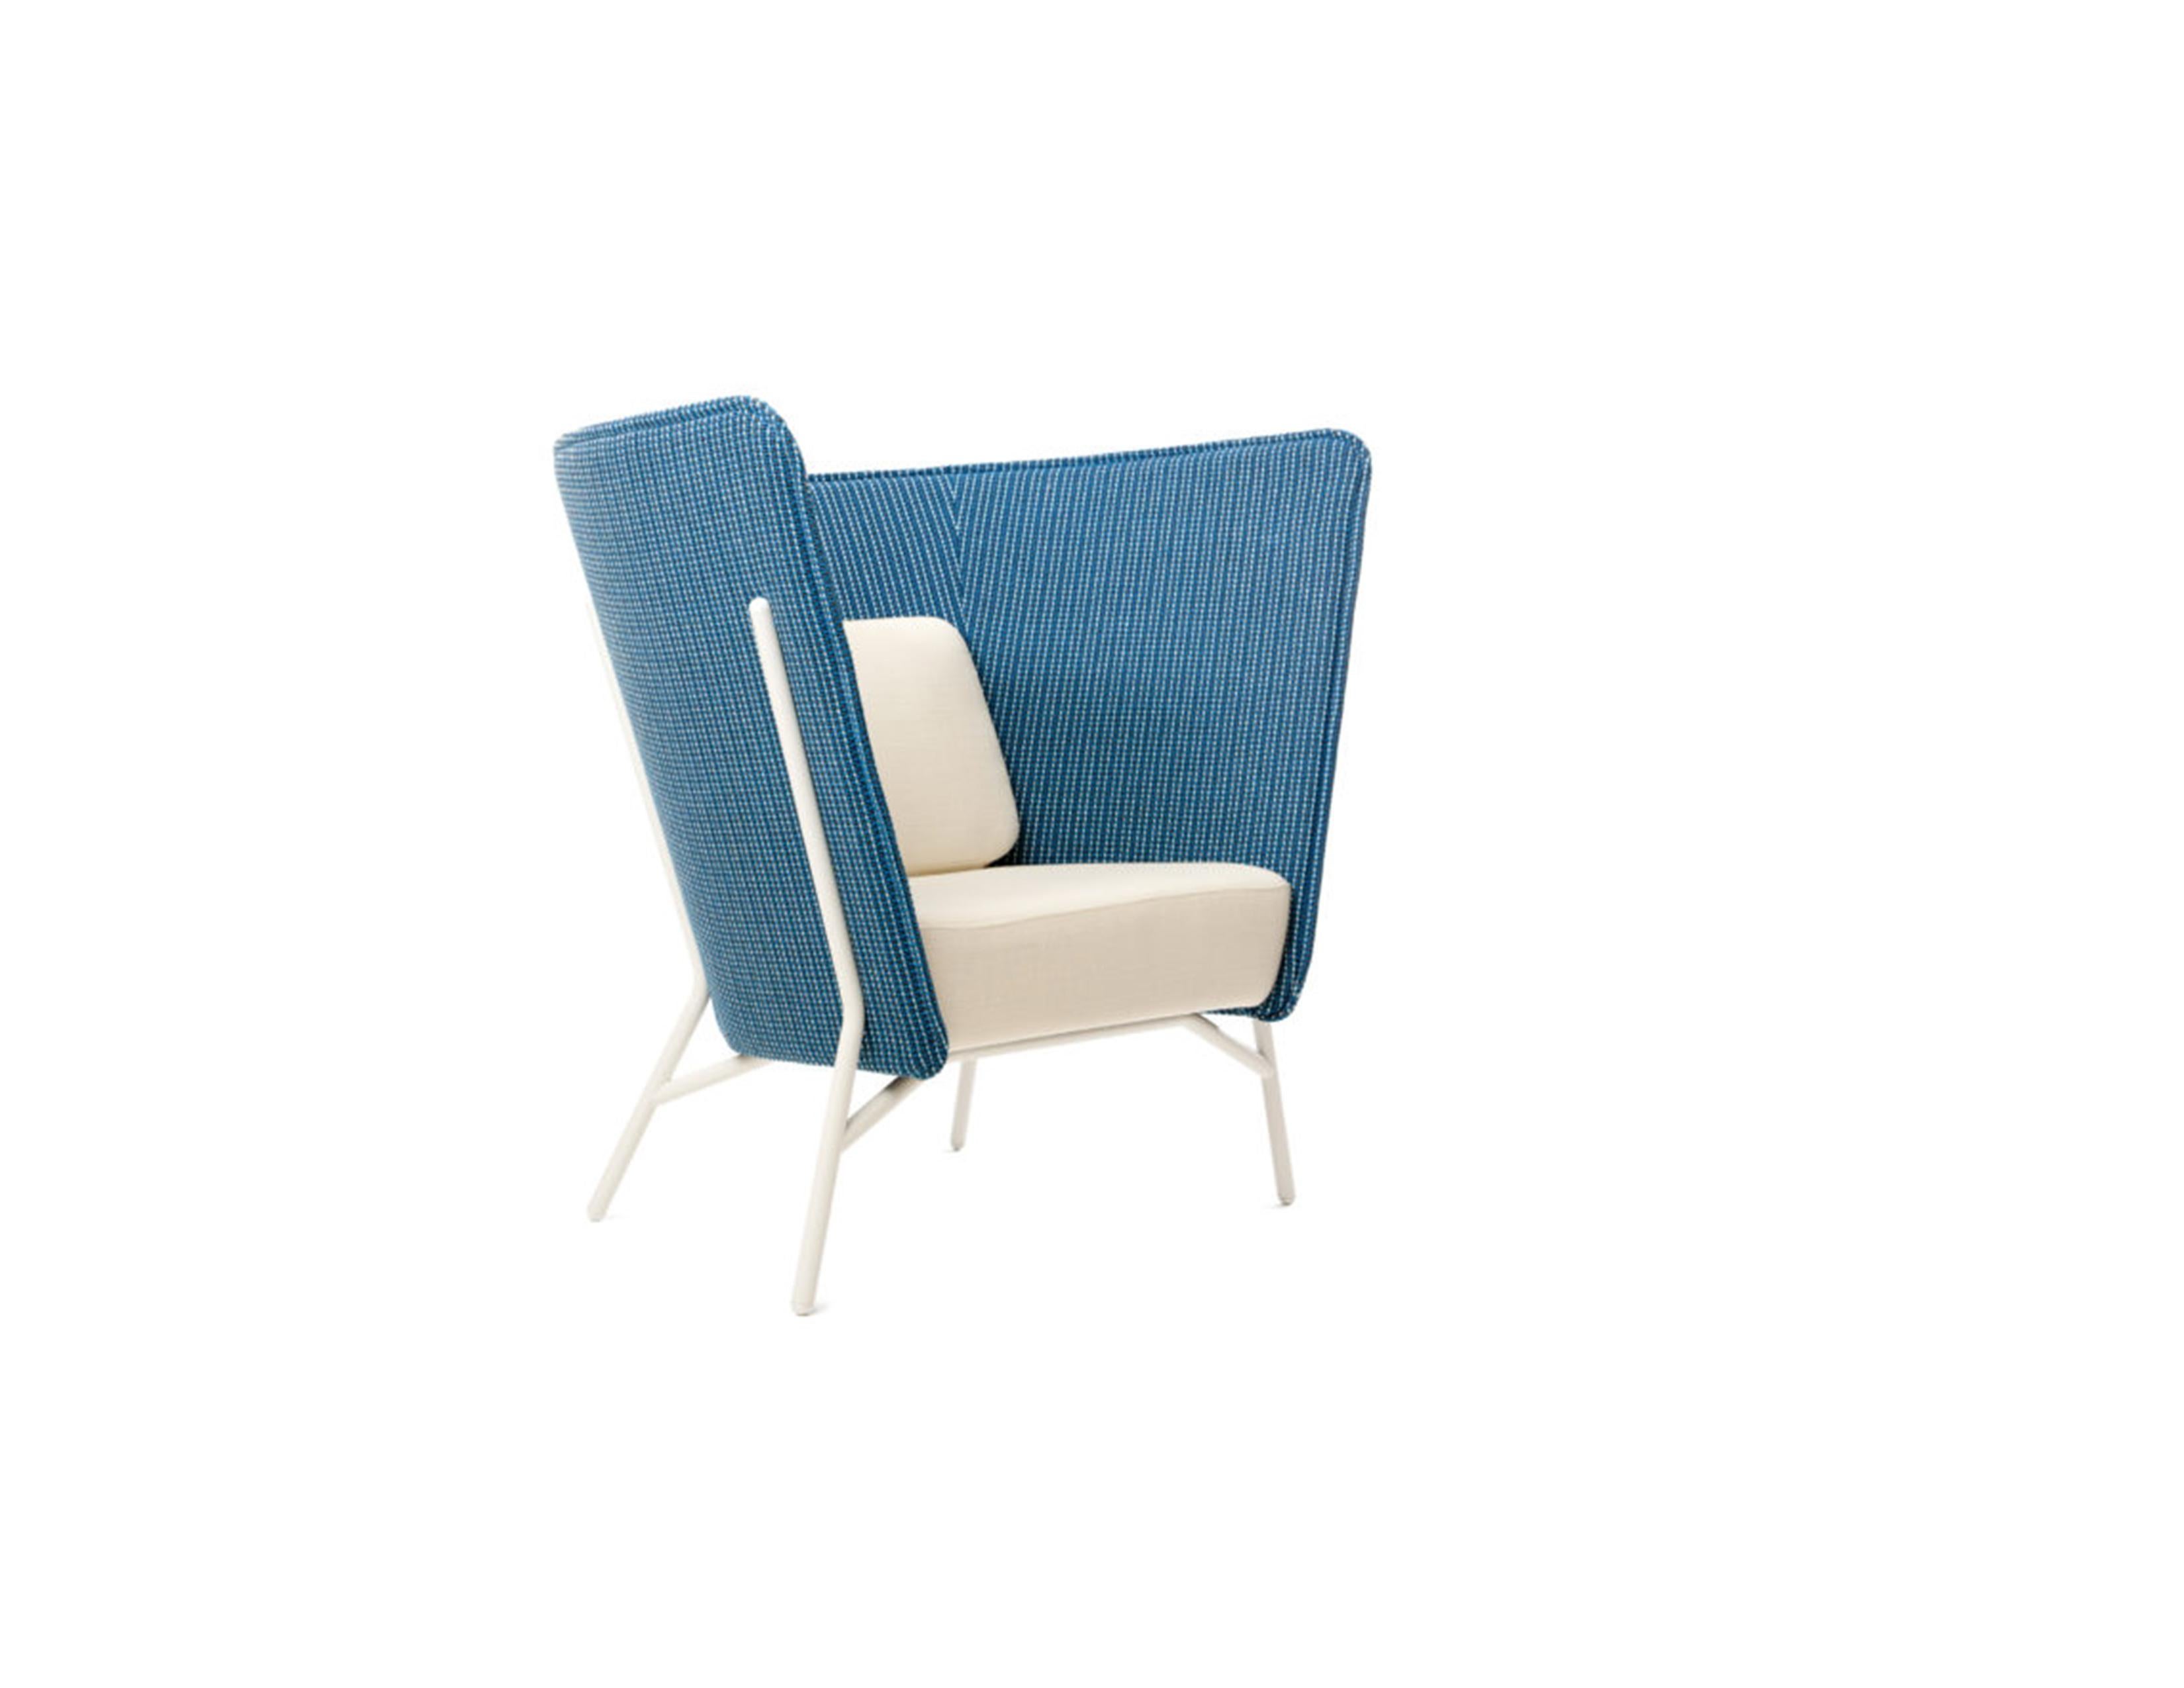 Aura chair L is defined by it’s sheltering high back that creates a secluded niche even in the busiest of environments. The high sculptural form of the lounge chair is a striking architectural element, but it also offers privacy and withdrawal in